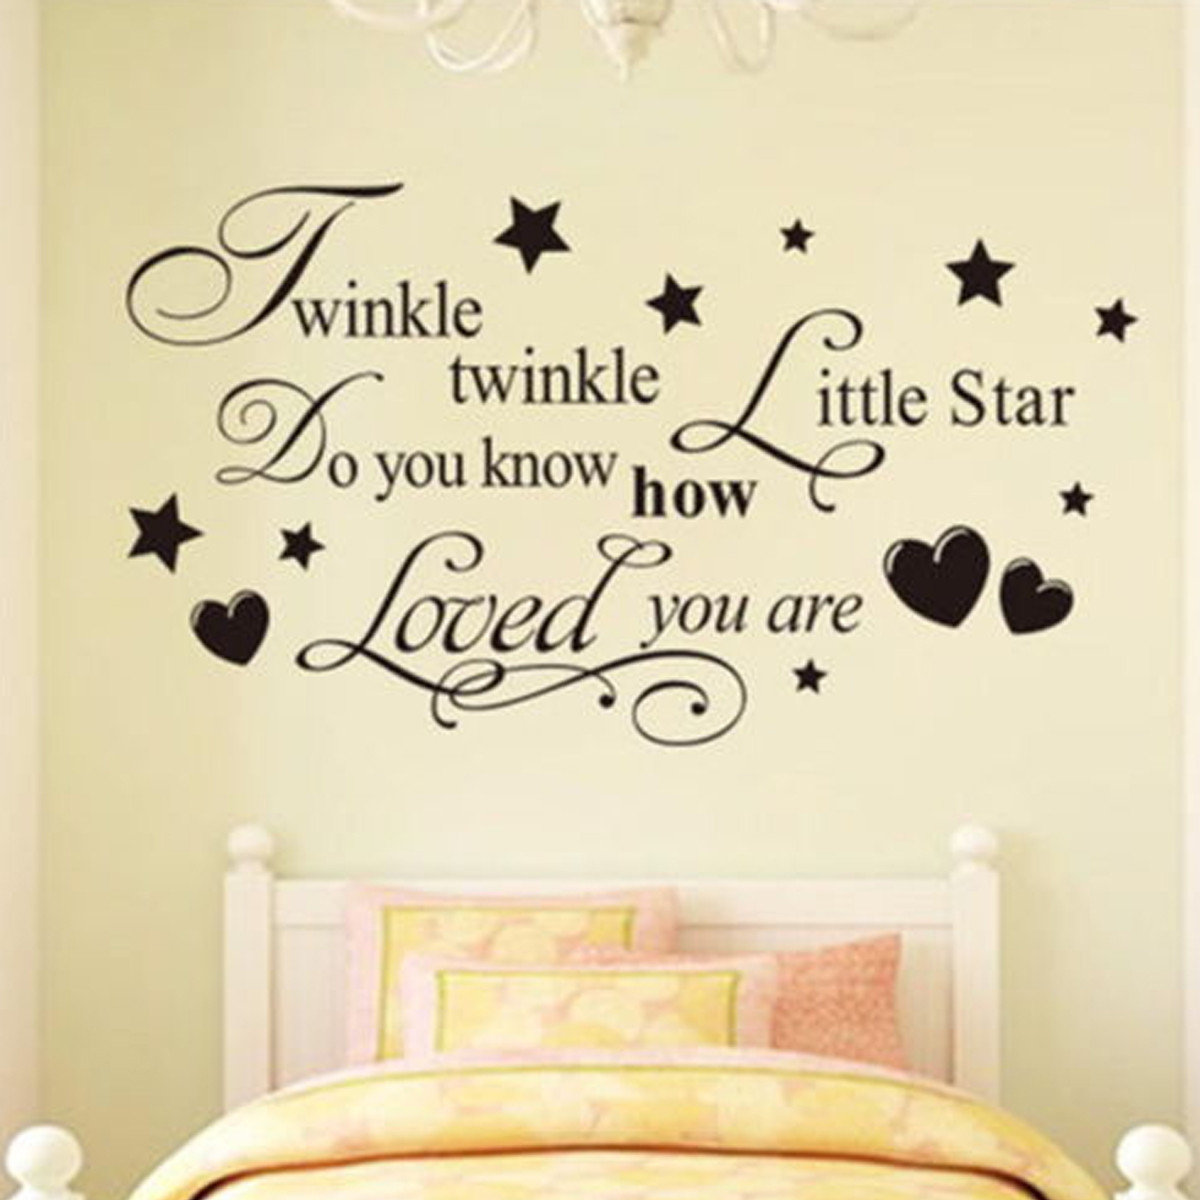 

Removable Twinkle Star Wall Decal Sticker Bedroom Living Room Home Decoration